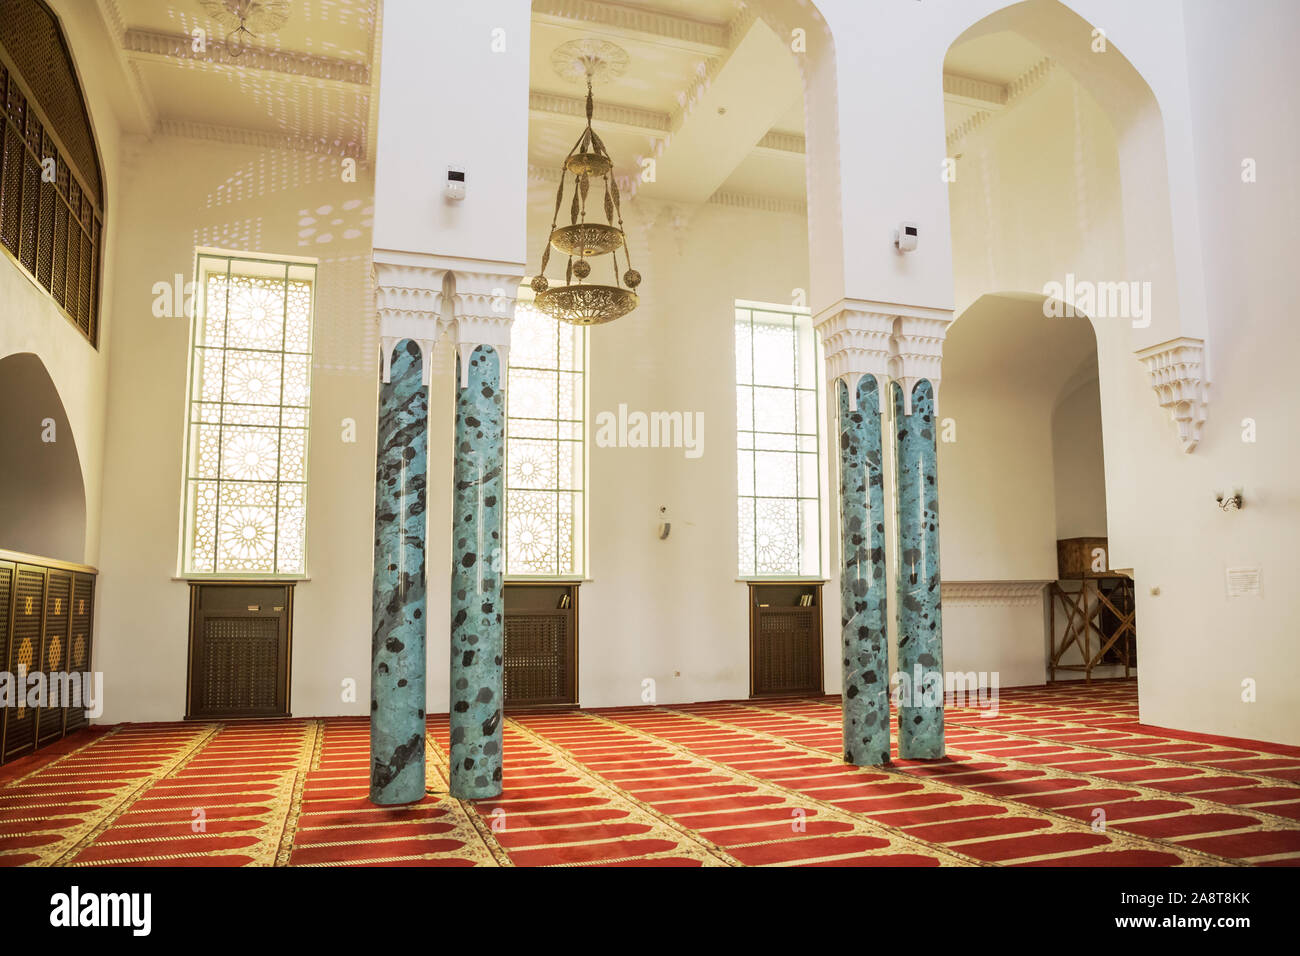 ST. PETERSBURG, RUSSIA - OCTOBER 26, 2019: interior of the cathedral mosque in Saint Petersburg Stock Photo